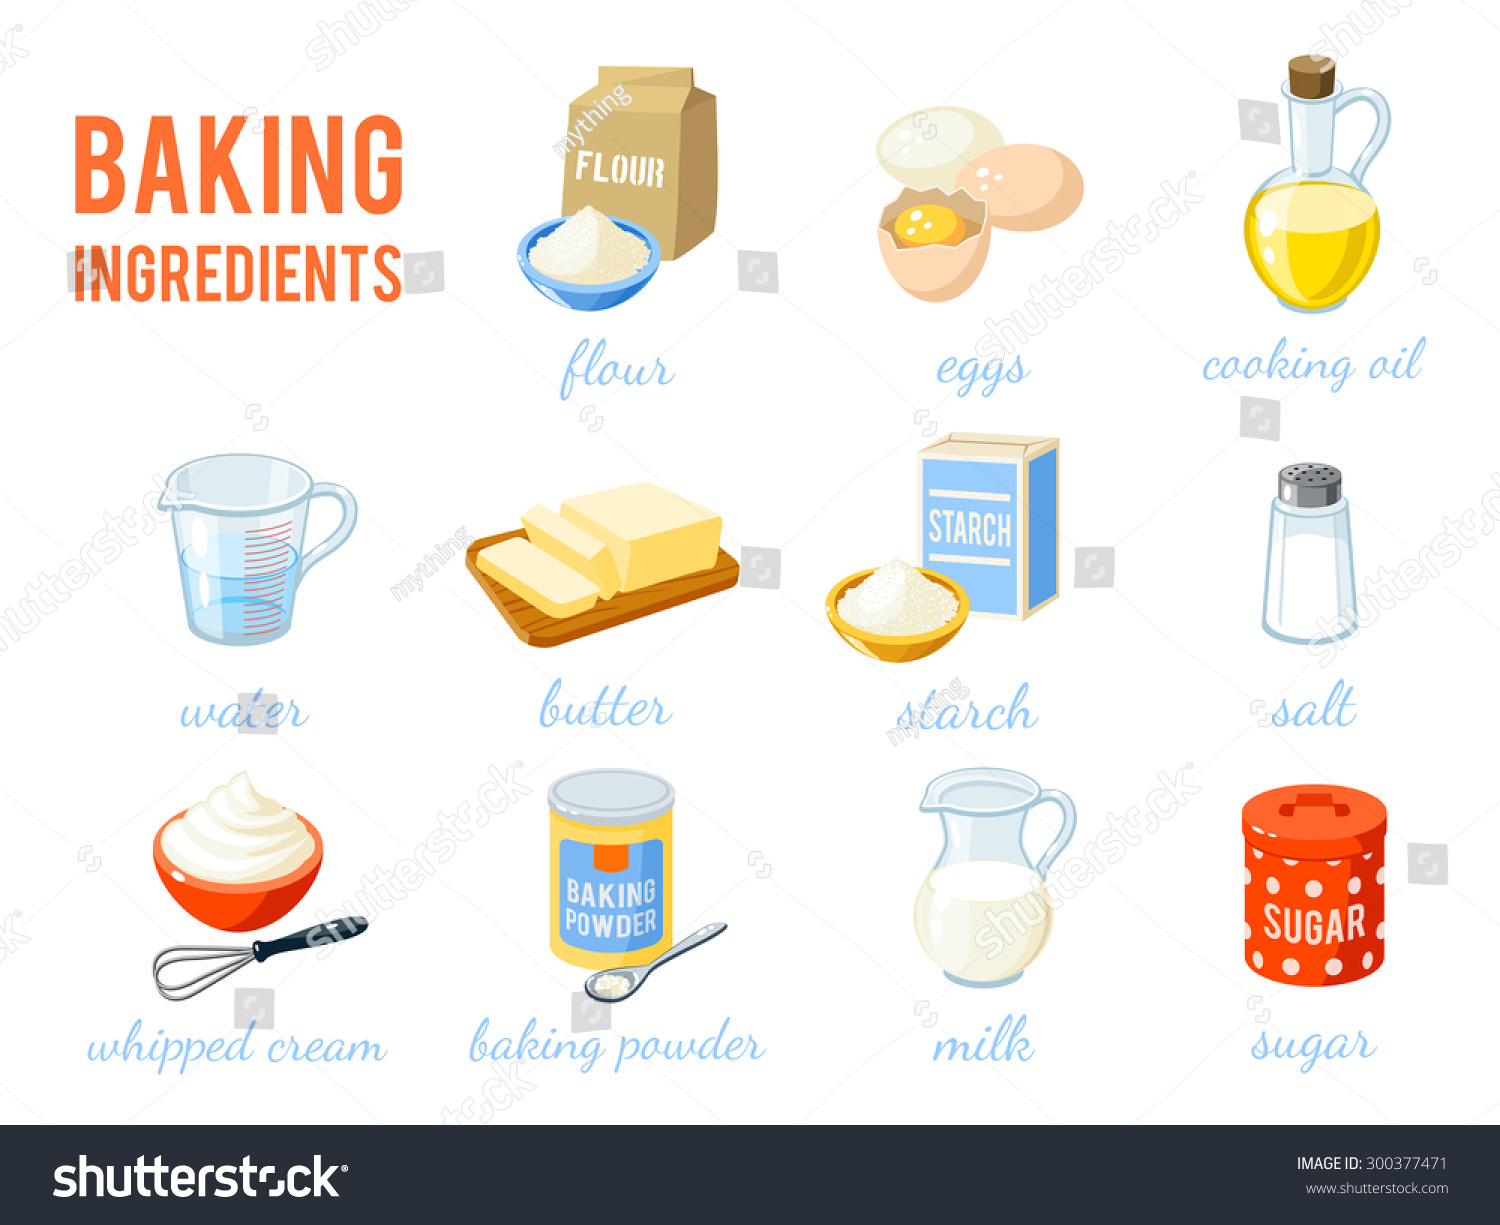 Set of cartoon food: baking ingredients - flour, eggs, oil, water, butter, starch, salt, whipped cream, baking powder, milk, sugar. Vector illustration, isolated on white, eps 10. #300377471